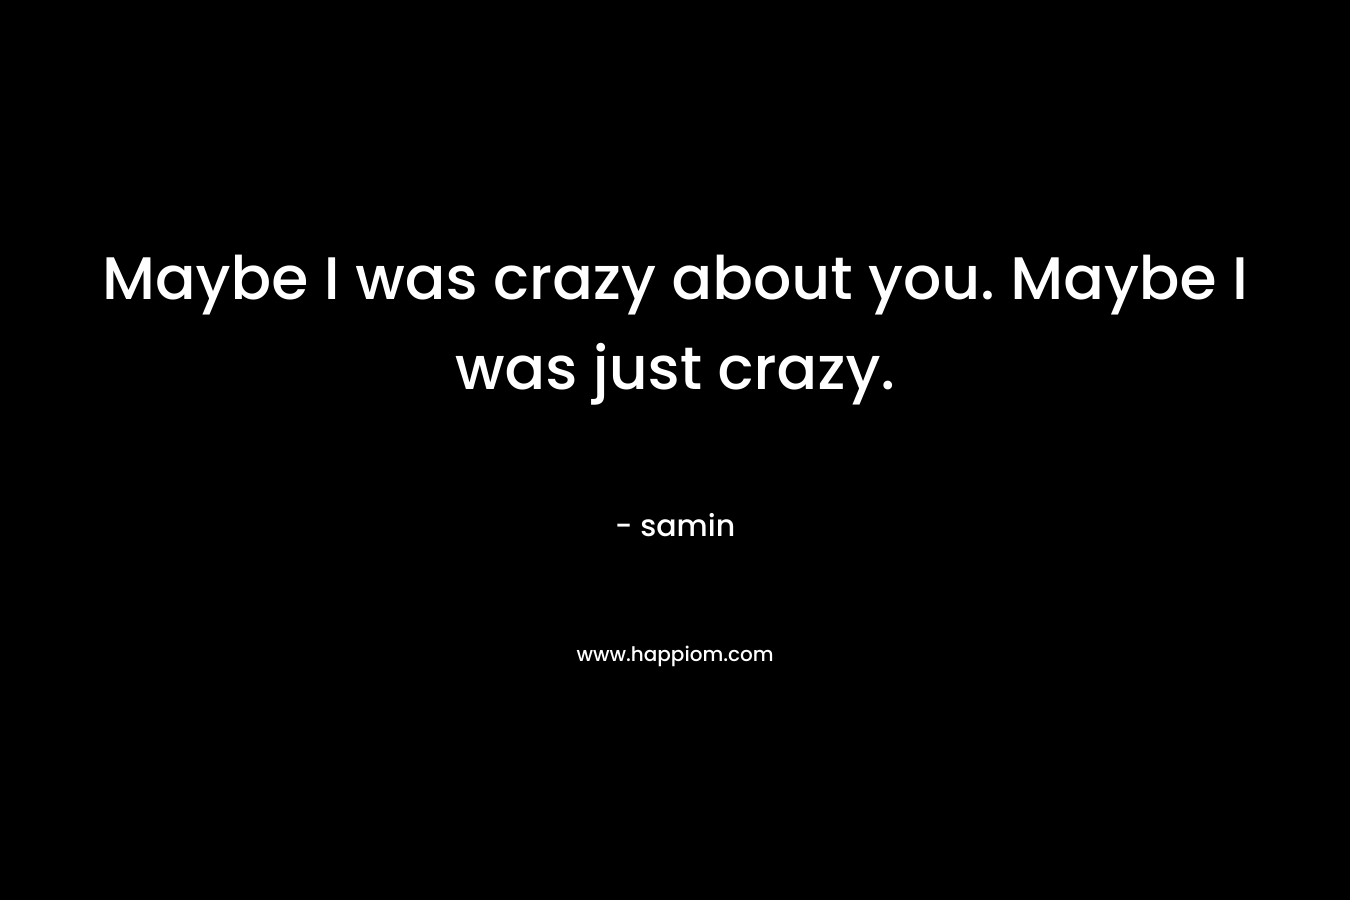 Maybe I was crazy about you. Maybe I was just crazy.